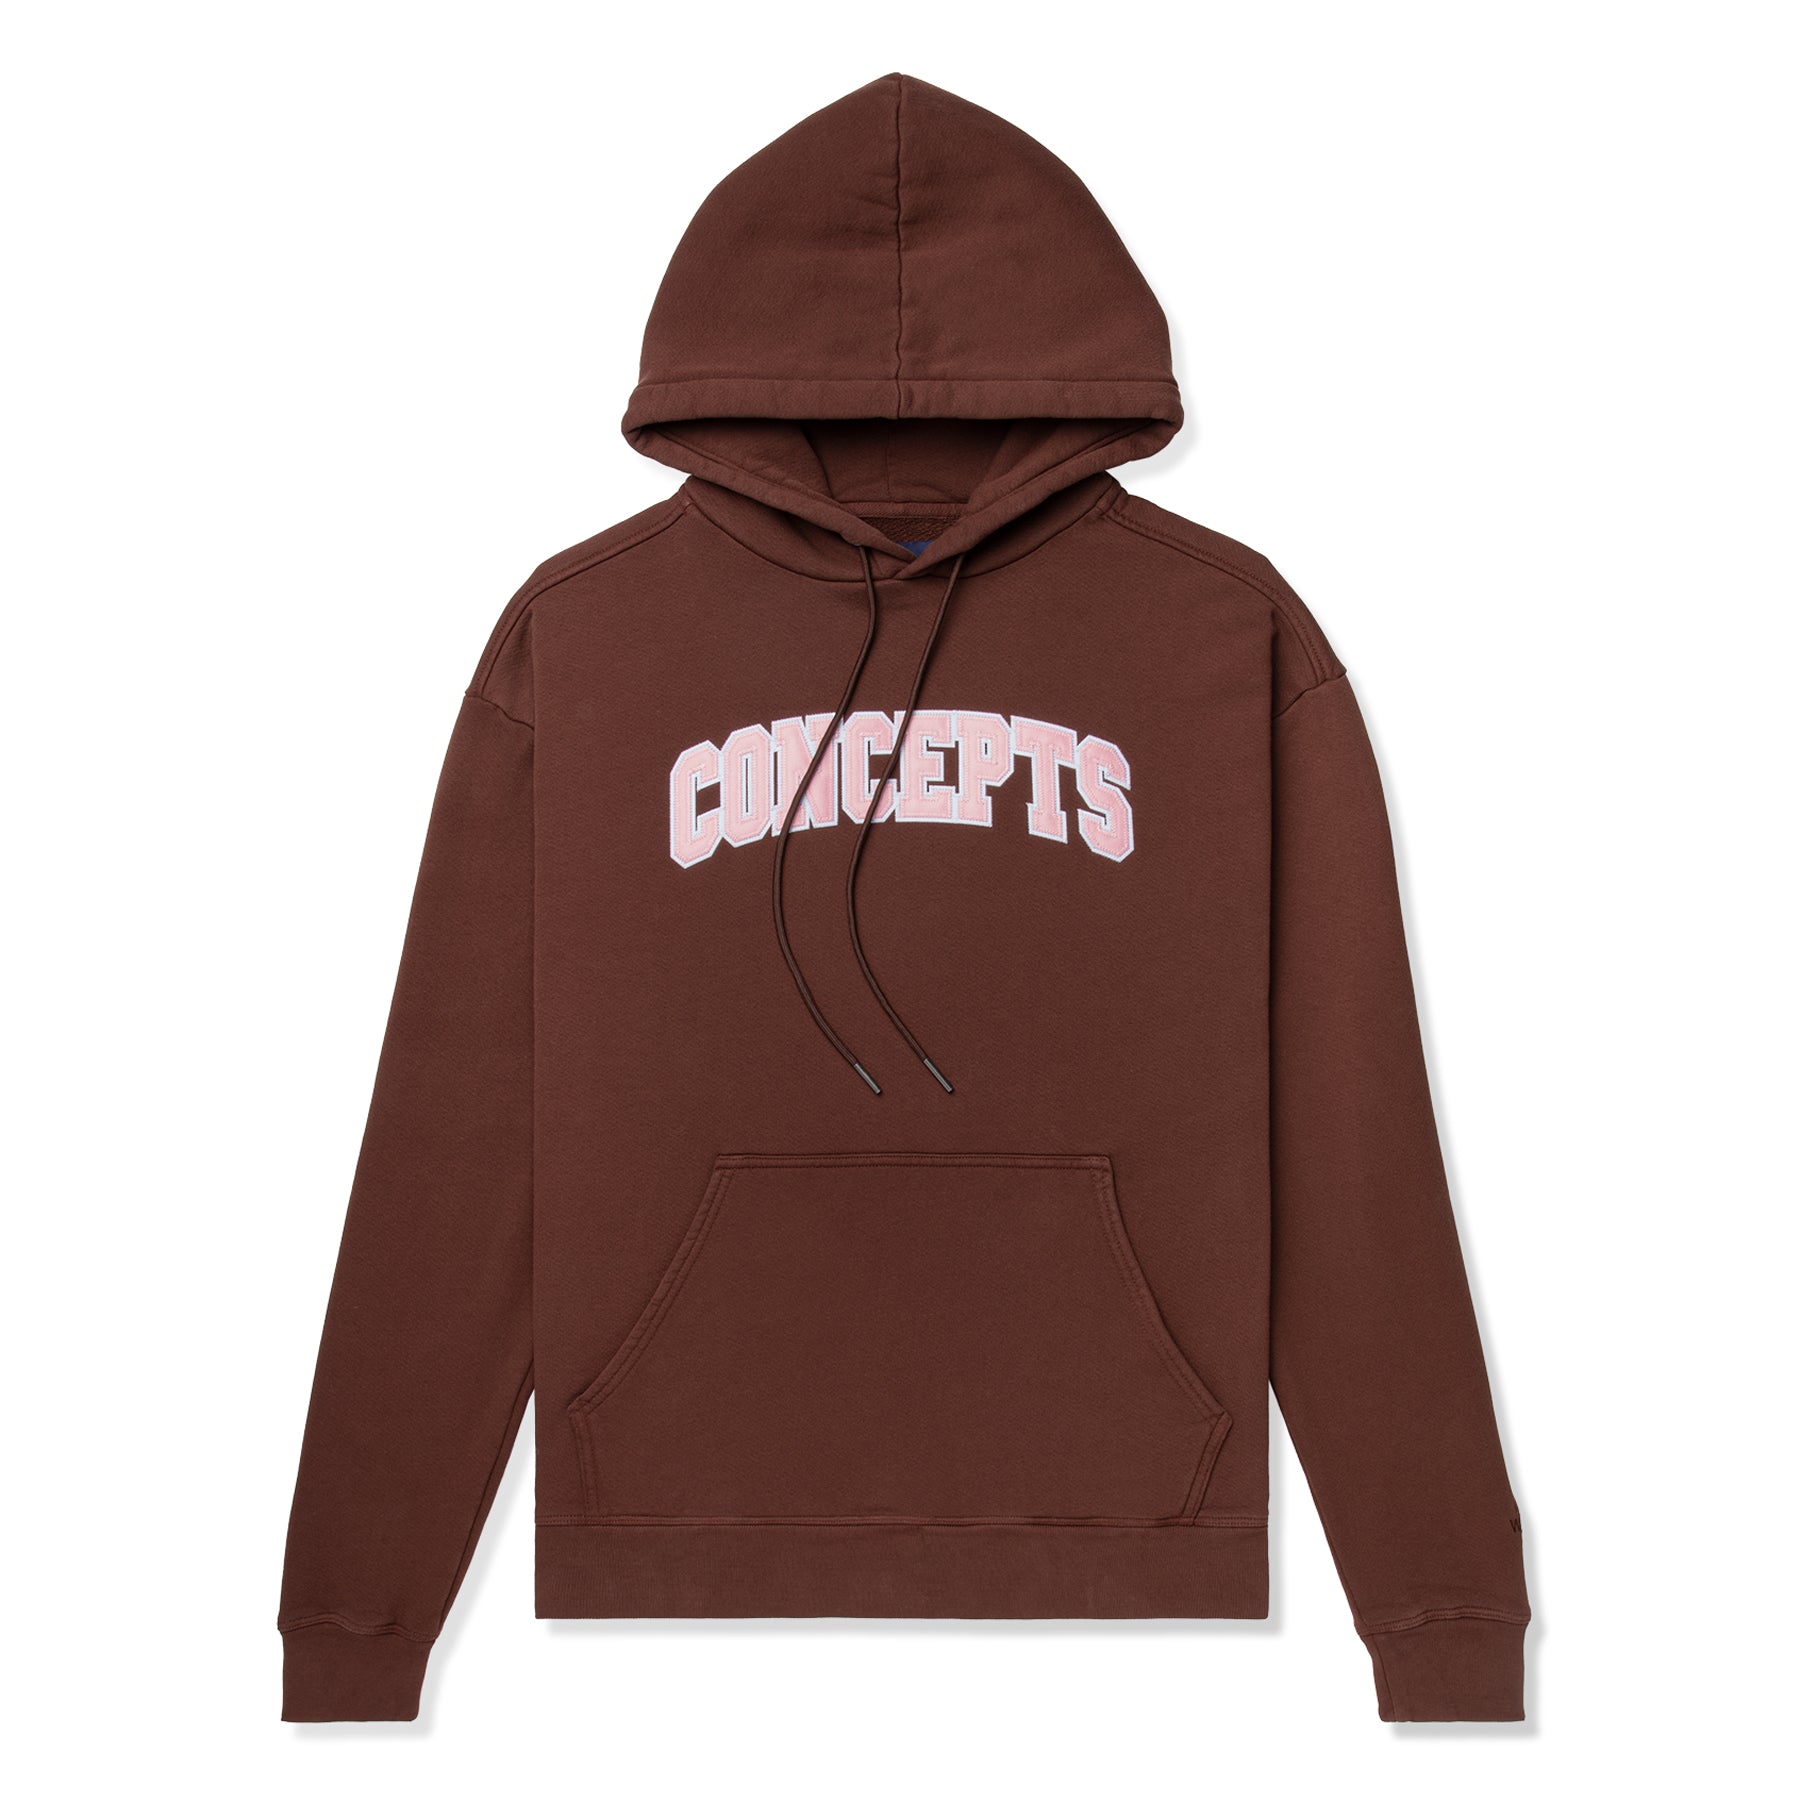 Cathedral Unisex Hoodie(Different shades of Brown) – BeSomethn